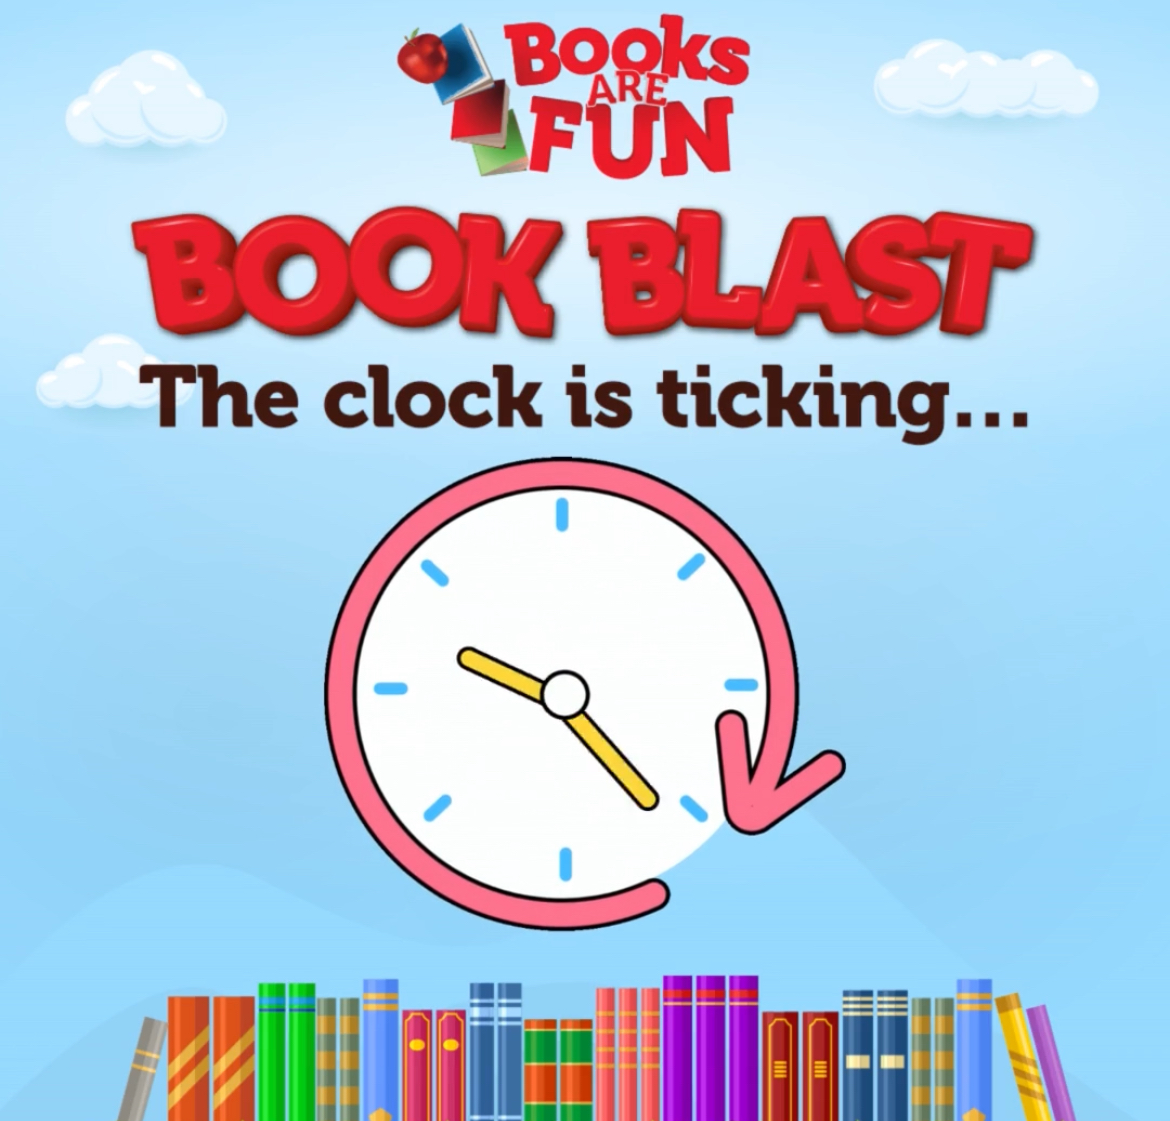 Time is ticking to earn our students more books!  bookblast.booksarefun.com/Diller-OdellES…

Thank you!
#griffinpride